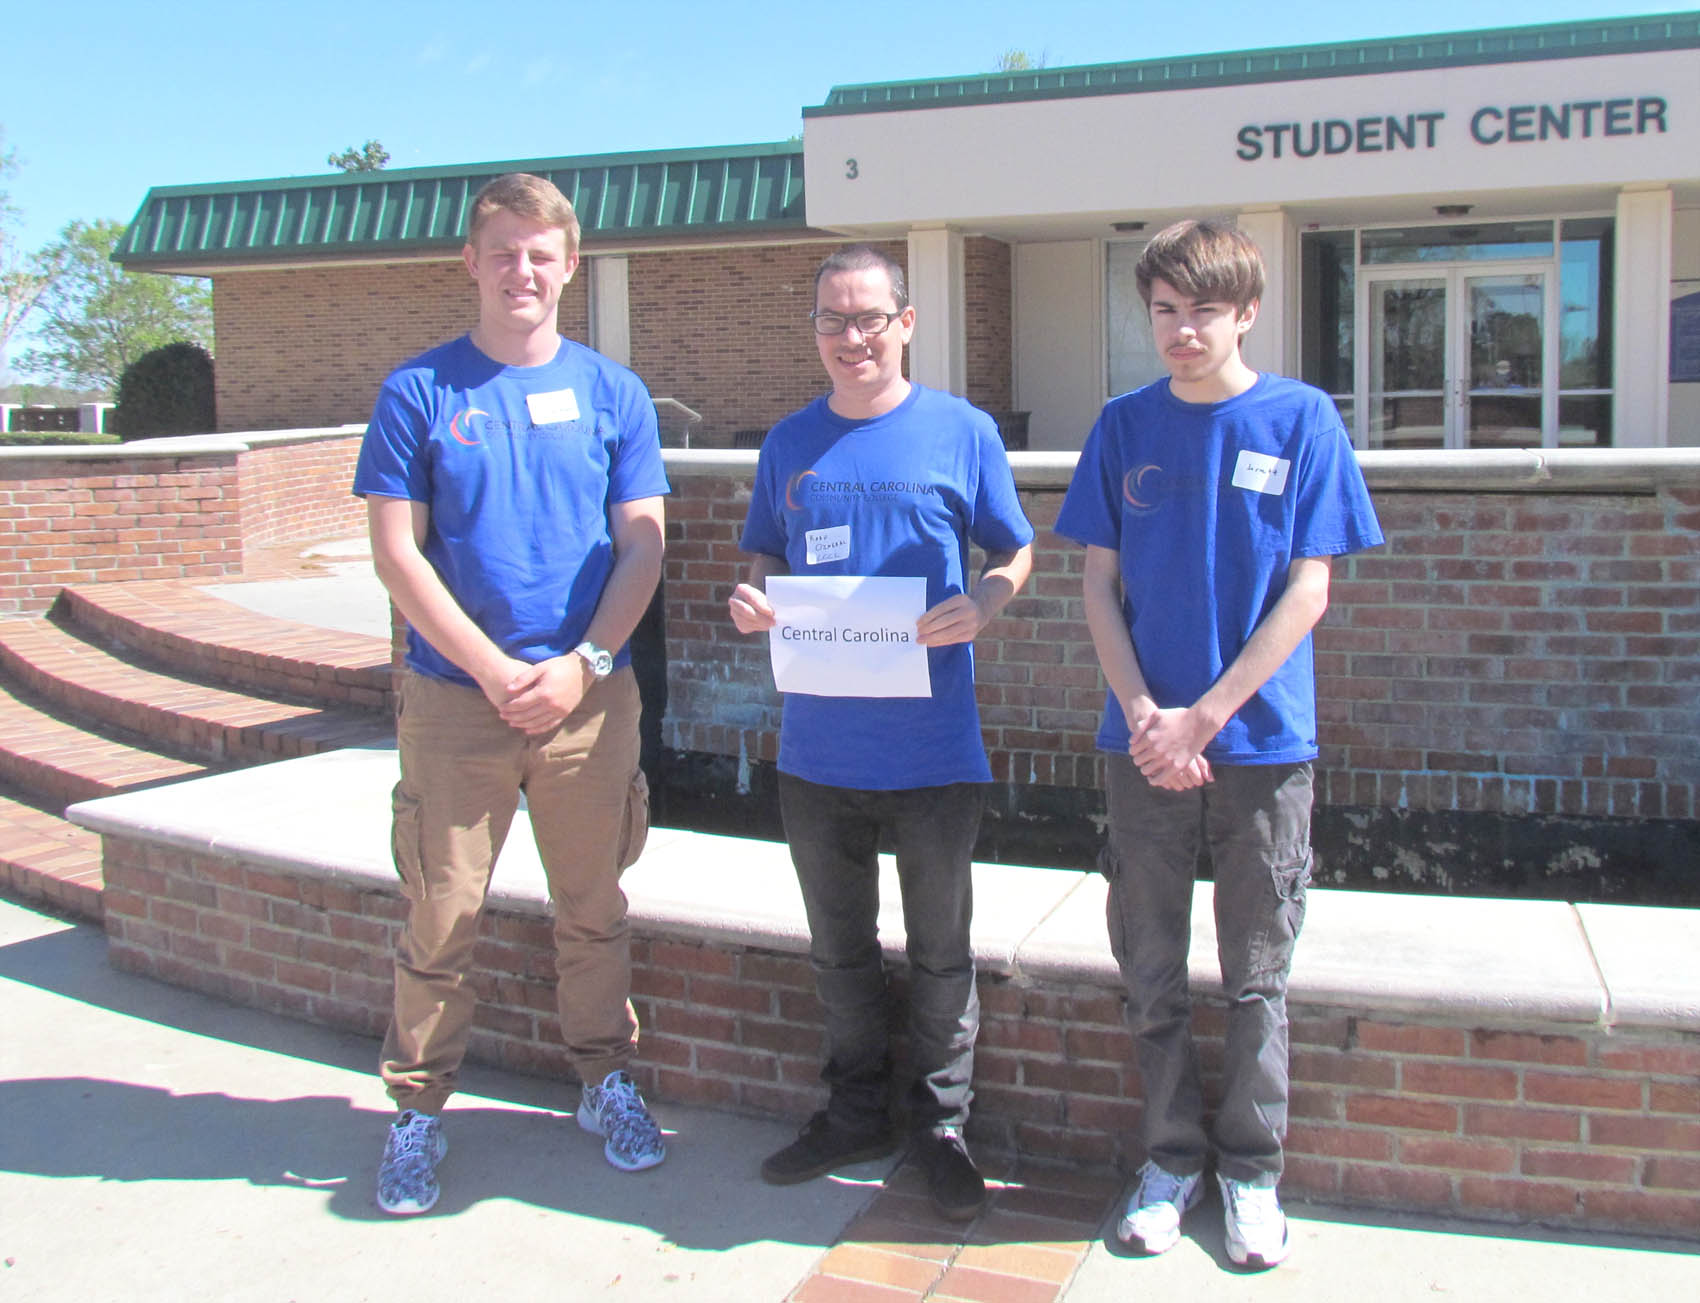 Read the full story, Two CCCC students compete in math tournament